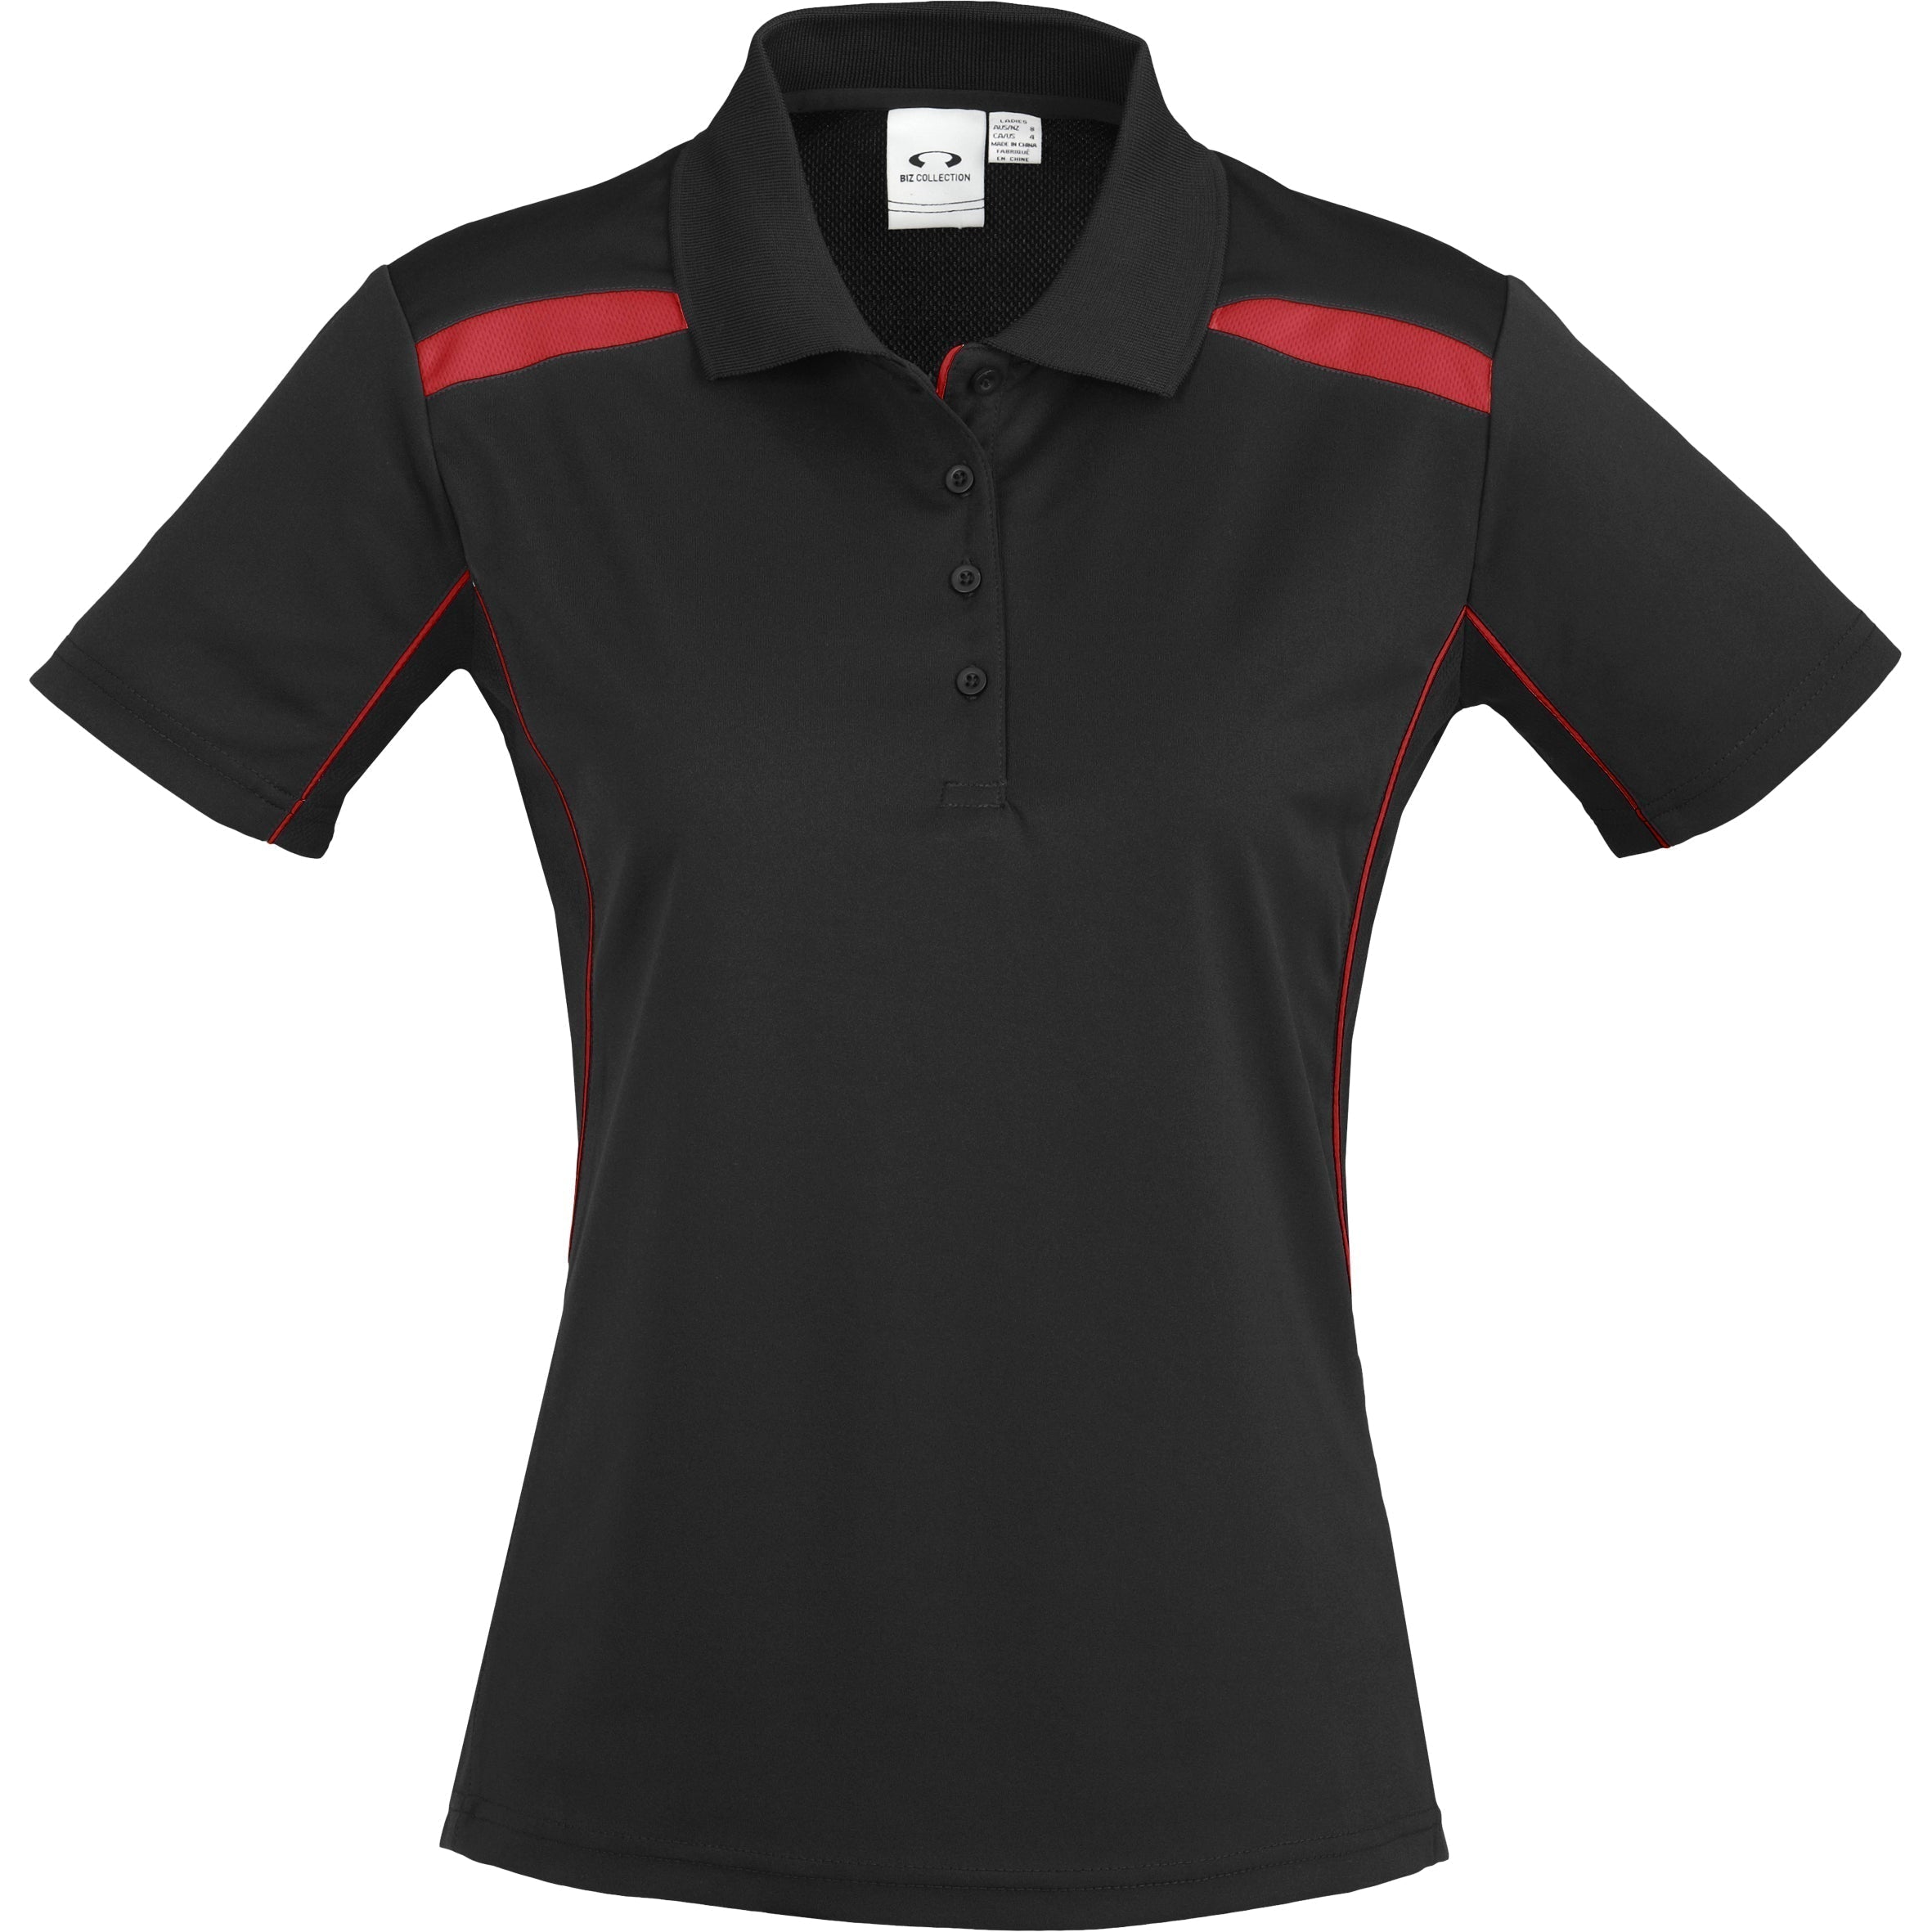 Ladies United Golf Shirt - White Navy Only-L-Black With Red-BLR